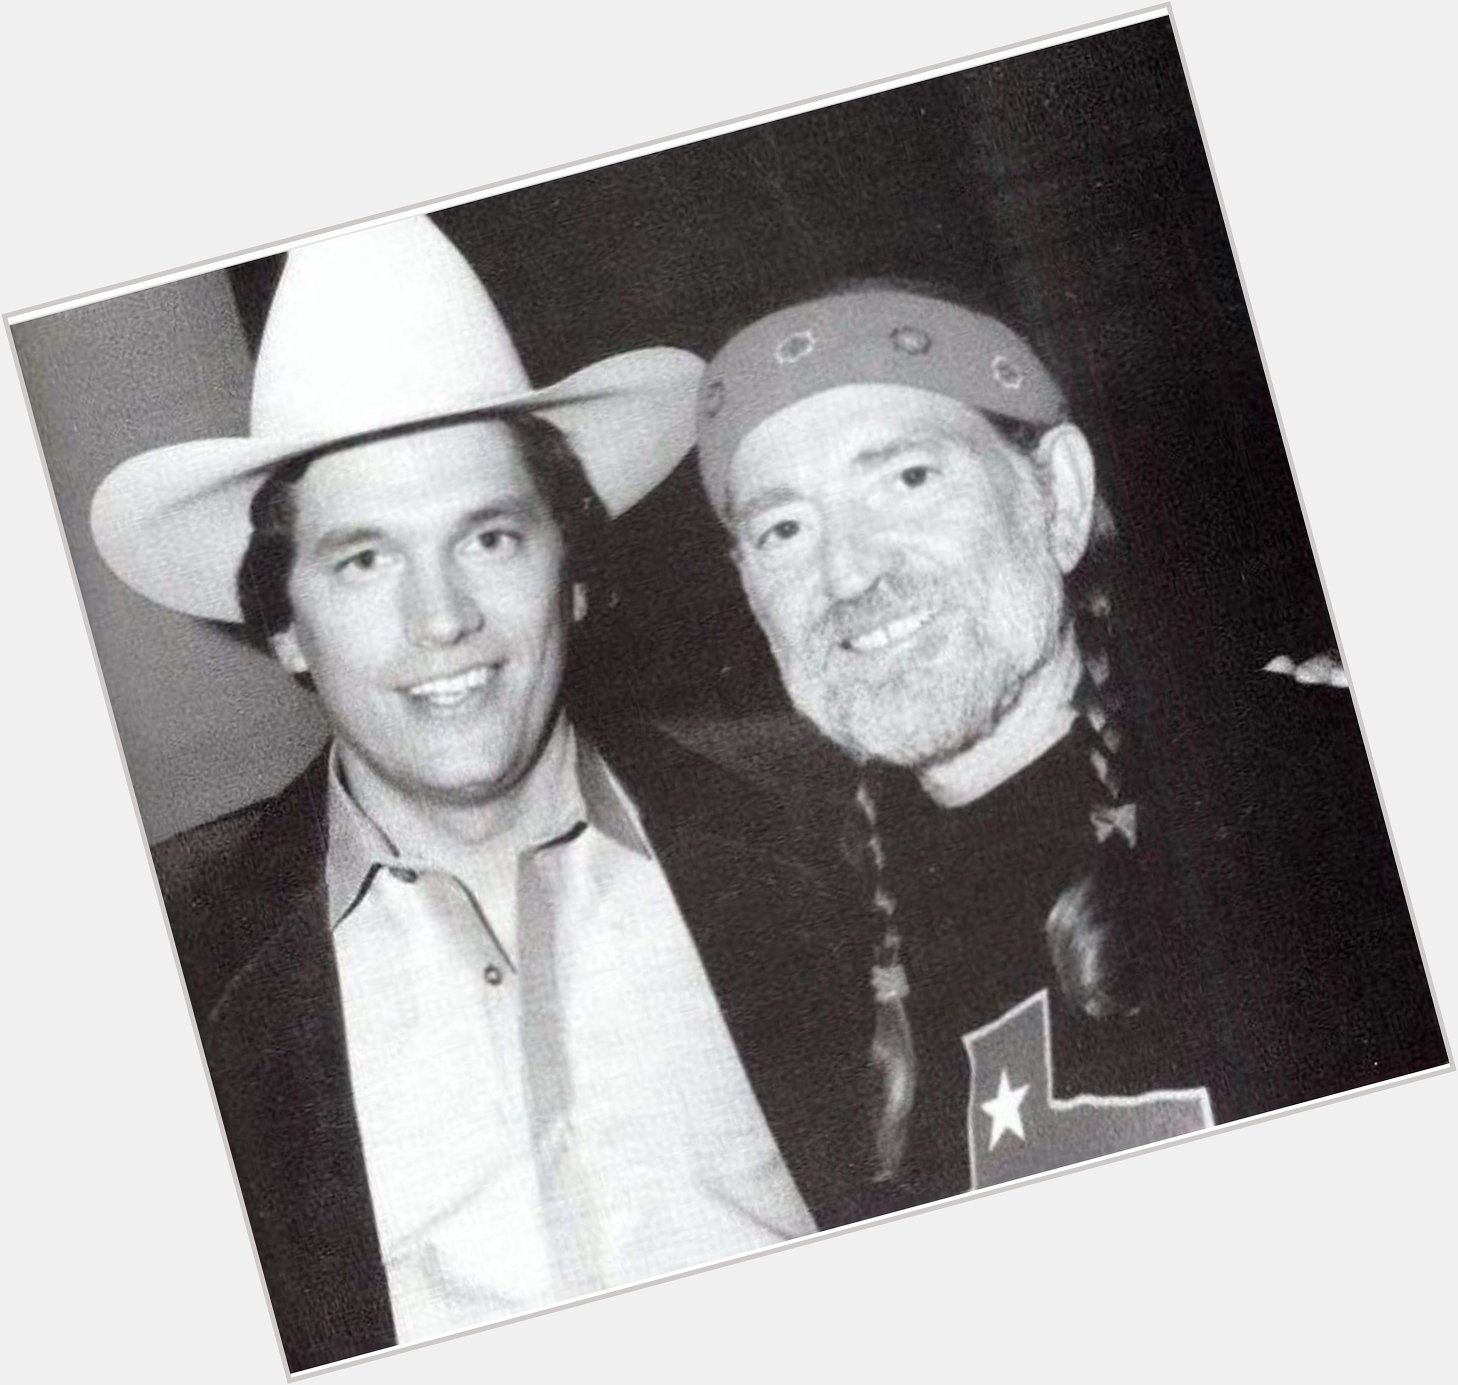 Sunday April 29
     Happy Birthday!  
          Willie Nelson

George Strait and Willie Nelson 